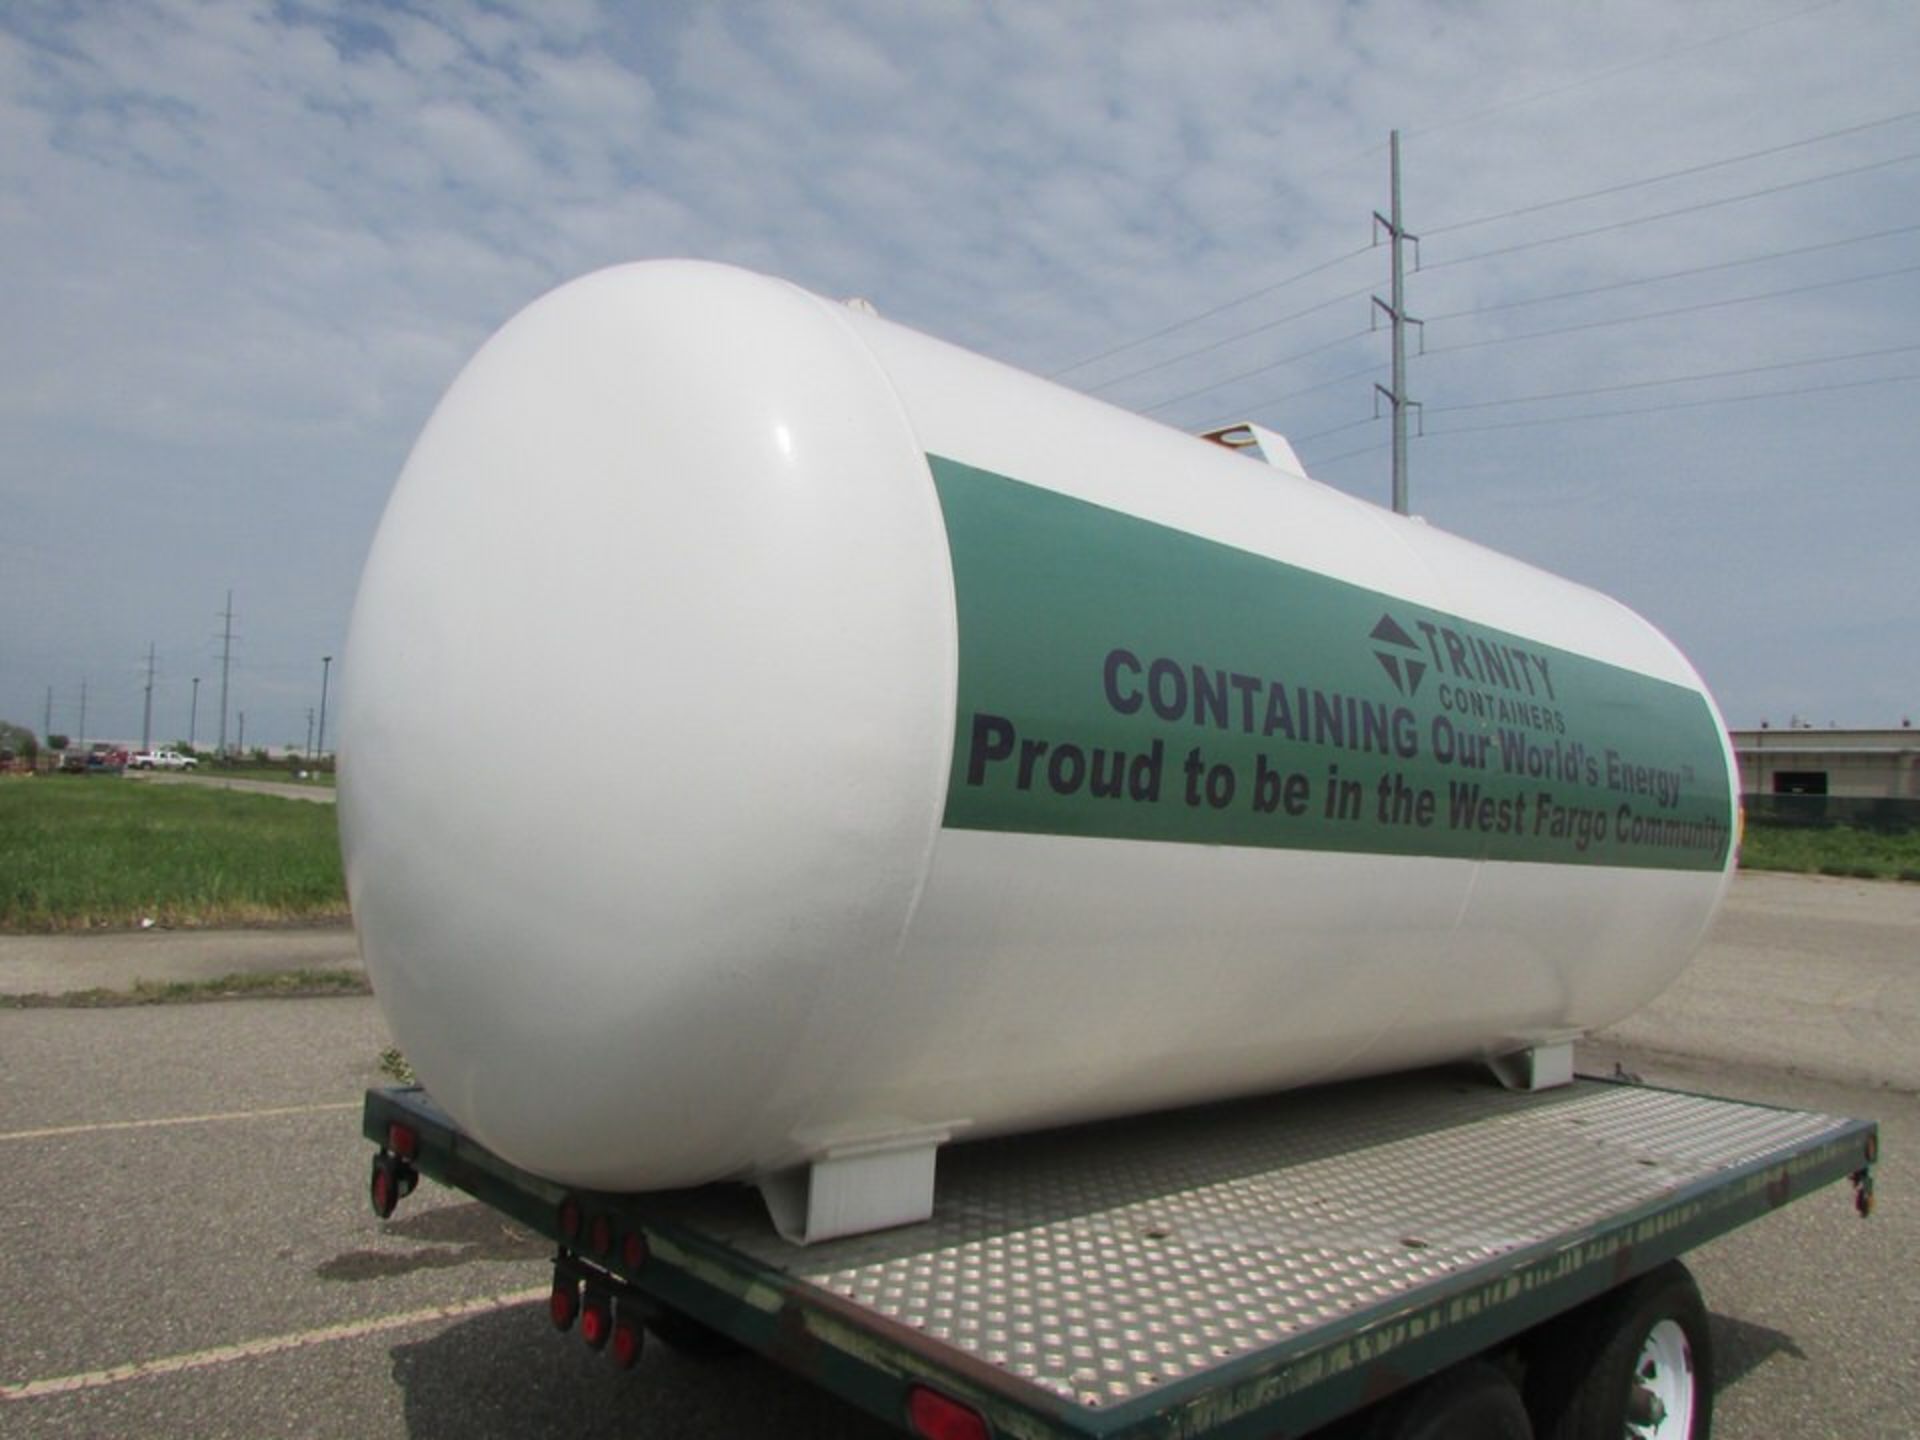 1999 Trinity Containers 3000 Gal Tank, 12'x6' Diameter. Loc. 420 Main Ave E, West Fargo, ND 58078 - Image 2 of 5